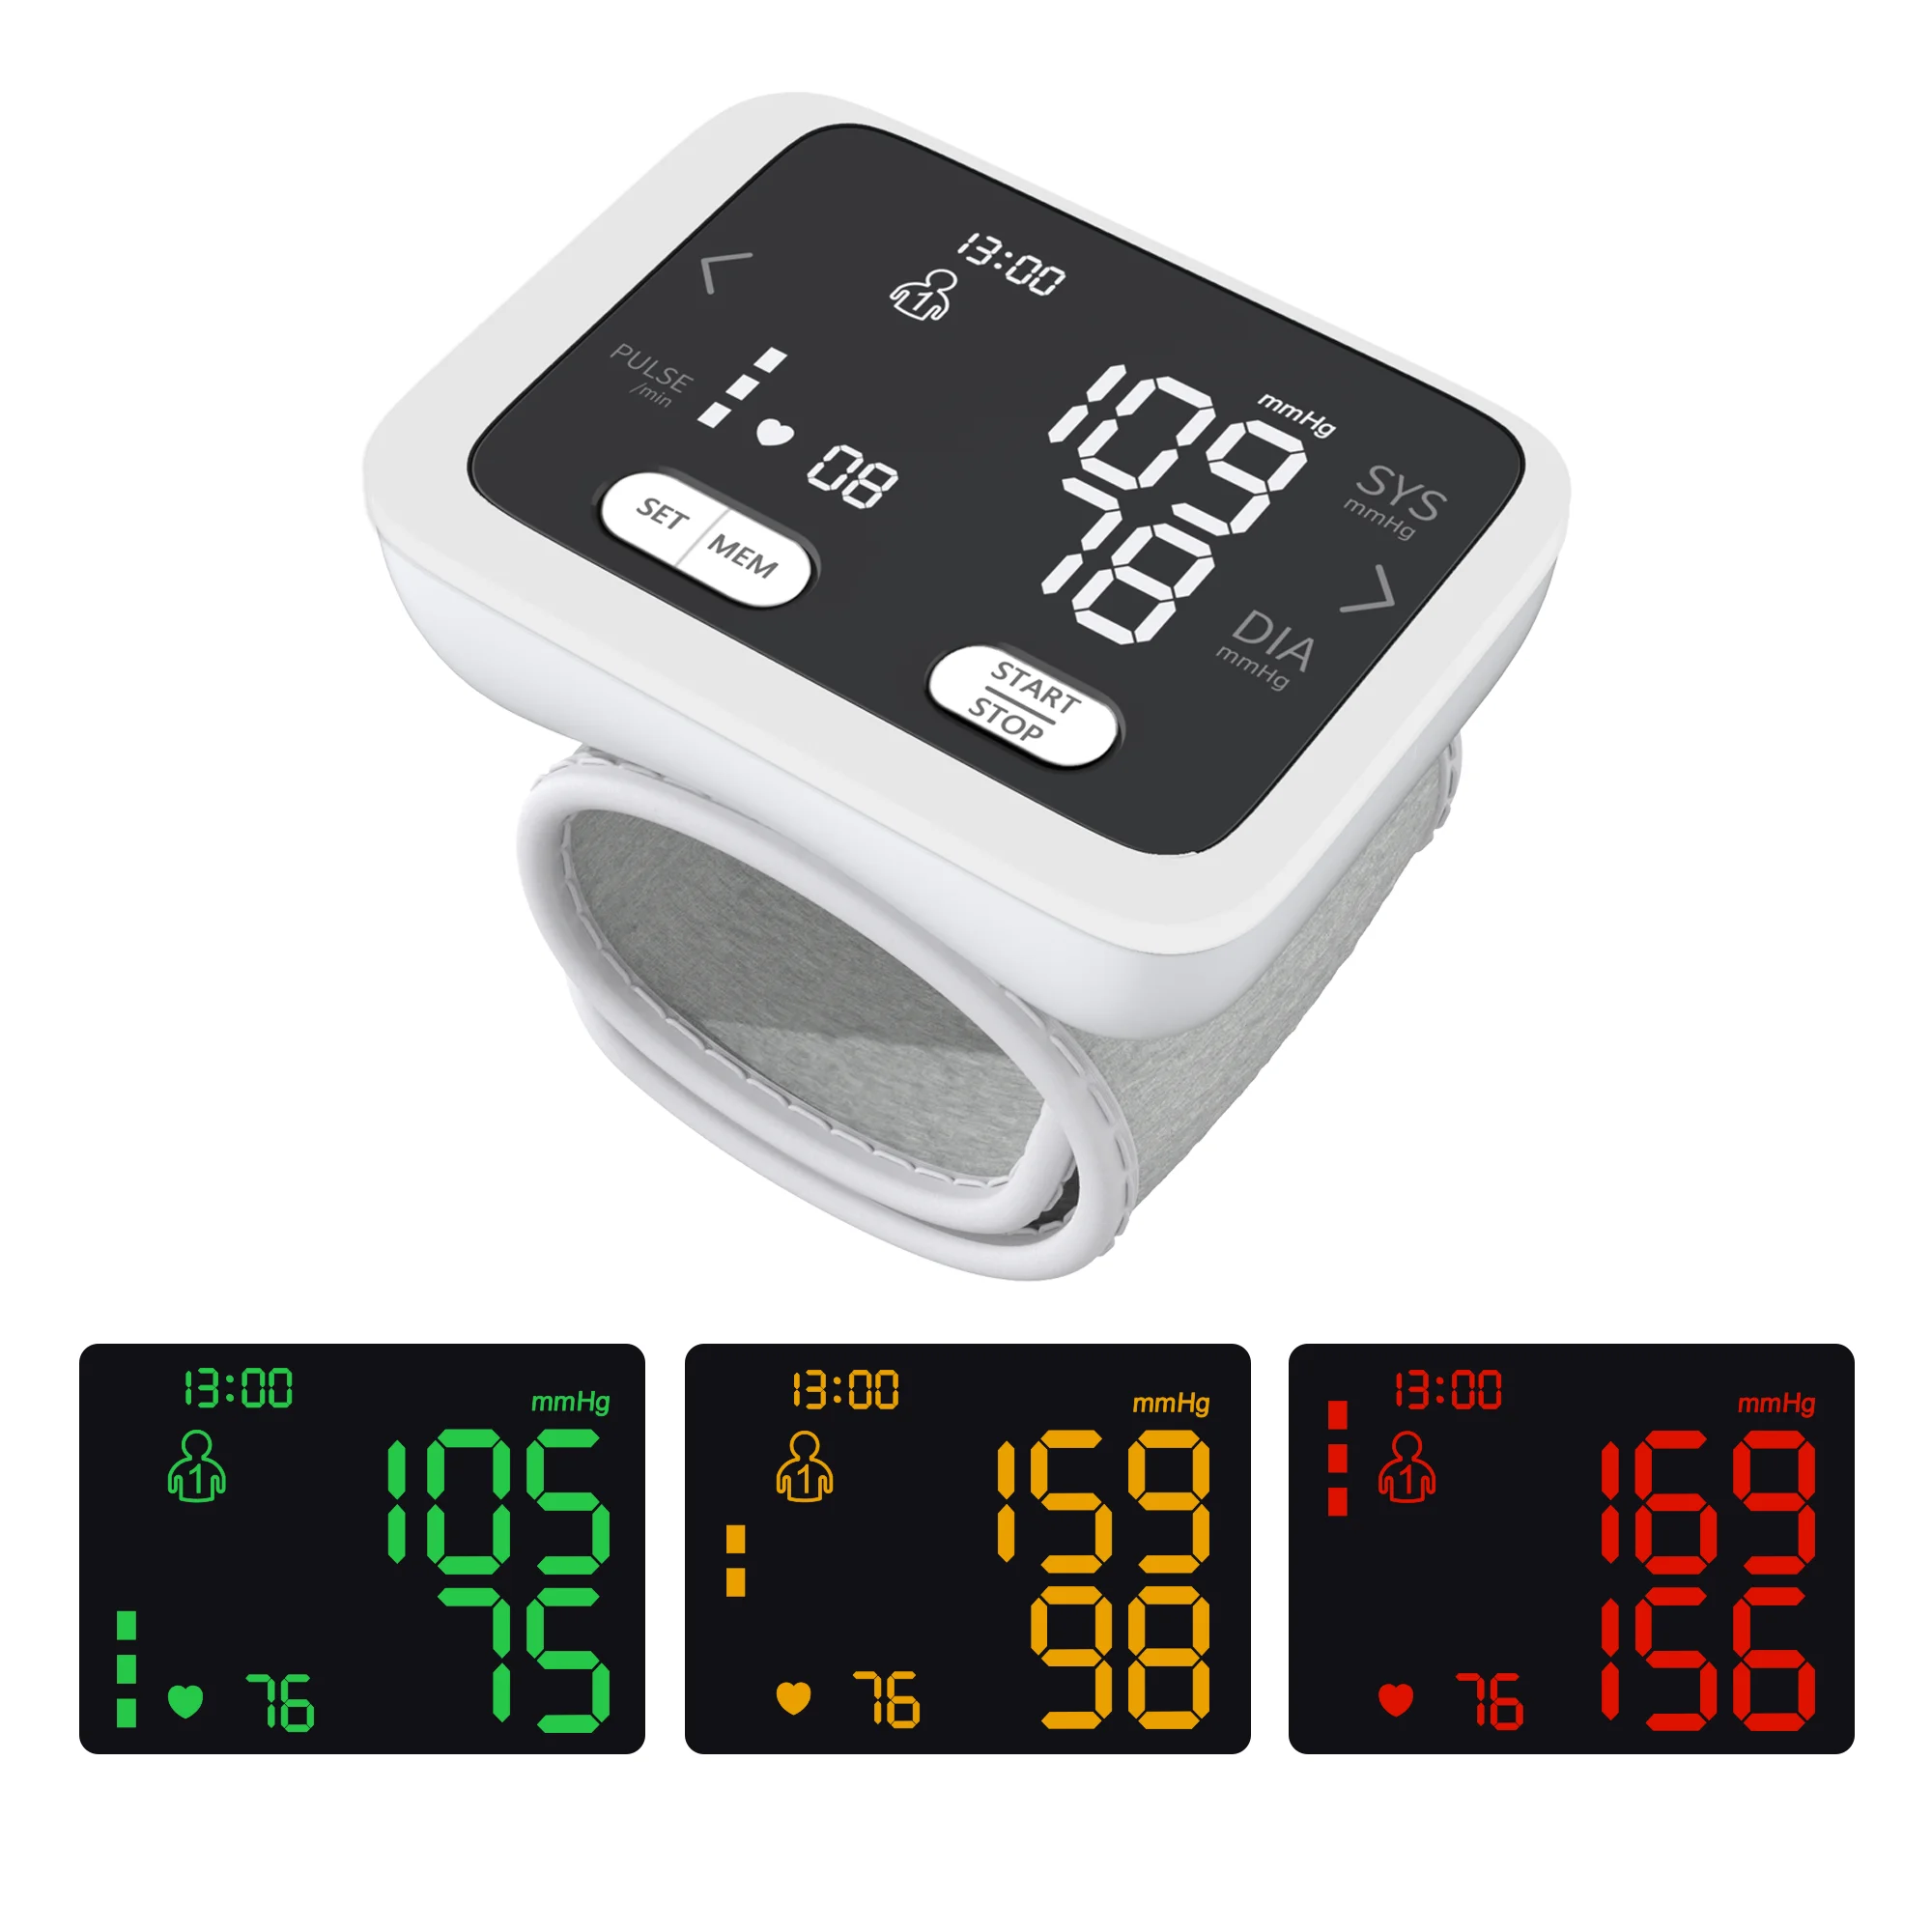 
portable wrist bp electronic blood pressure meter accurate 